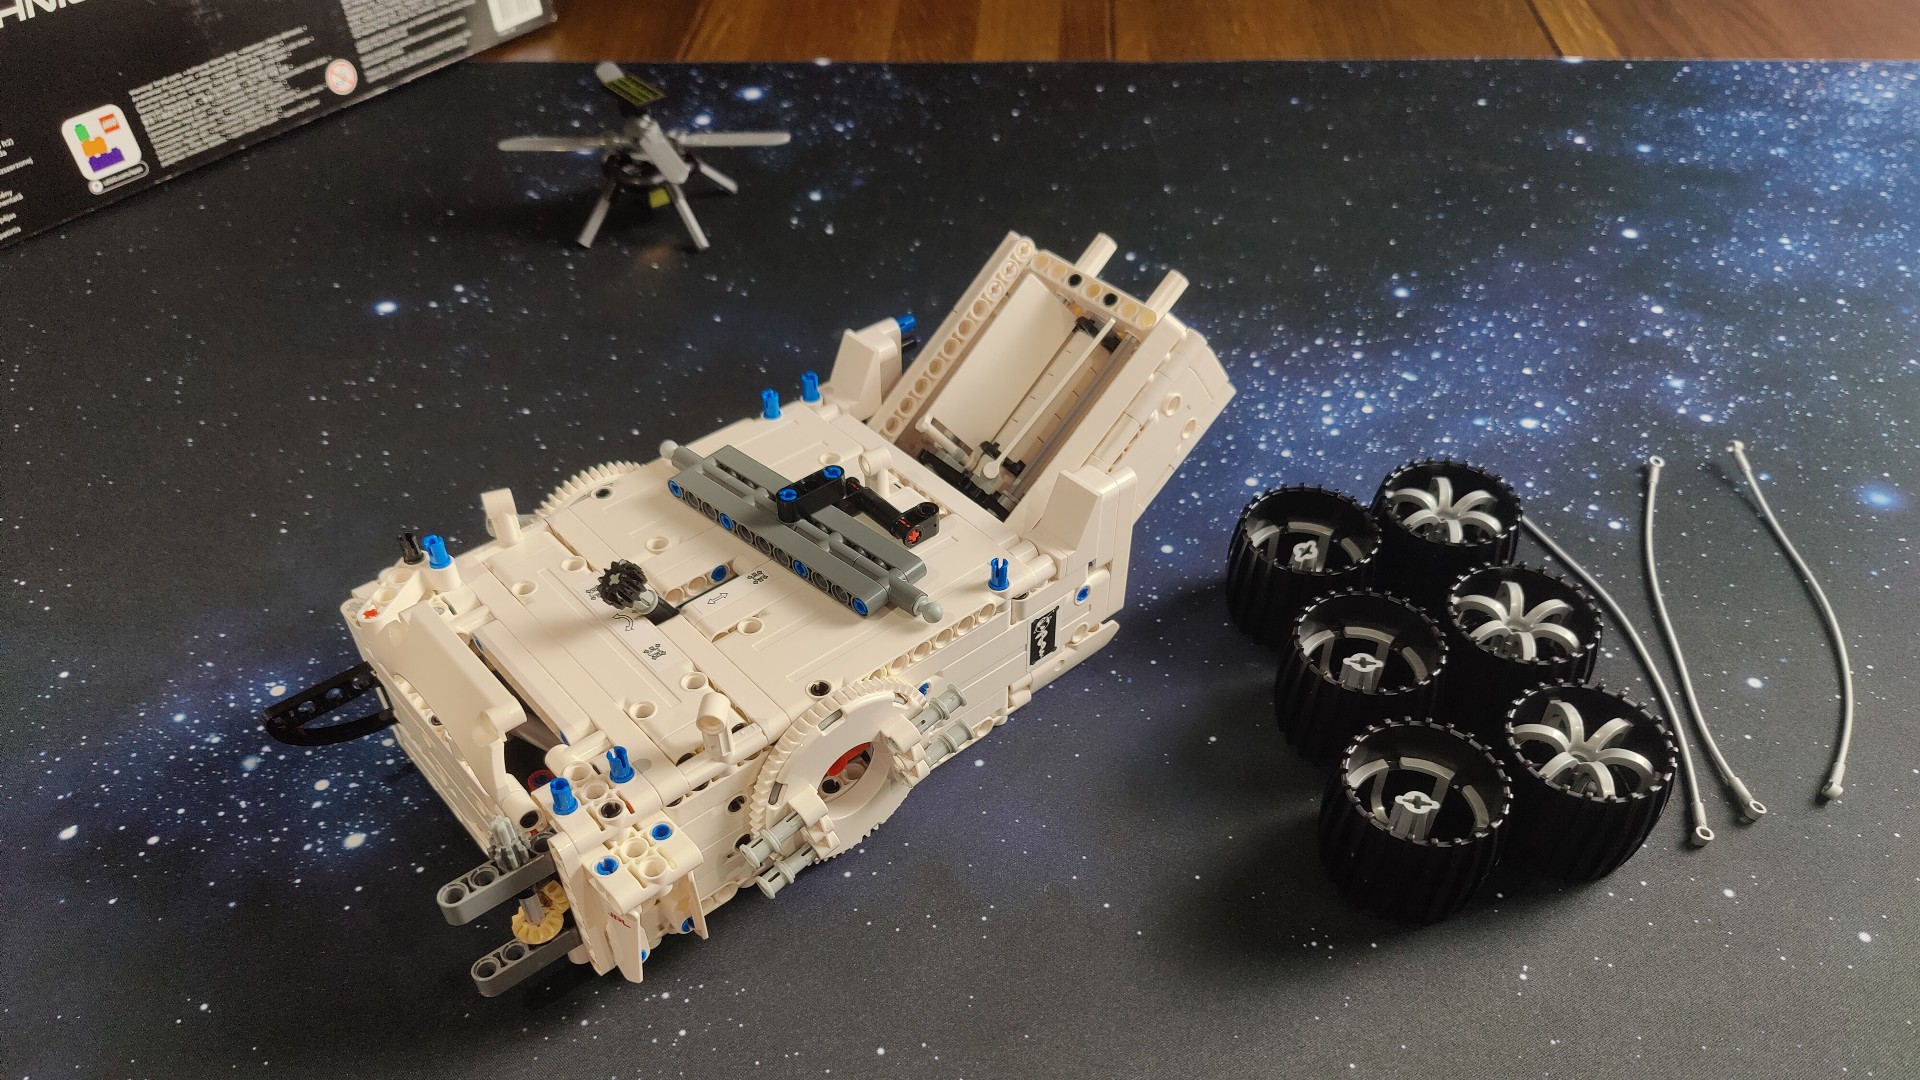 Photo of the Lego NASA Mars Rover Perseverance being built.